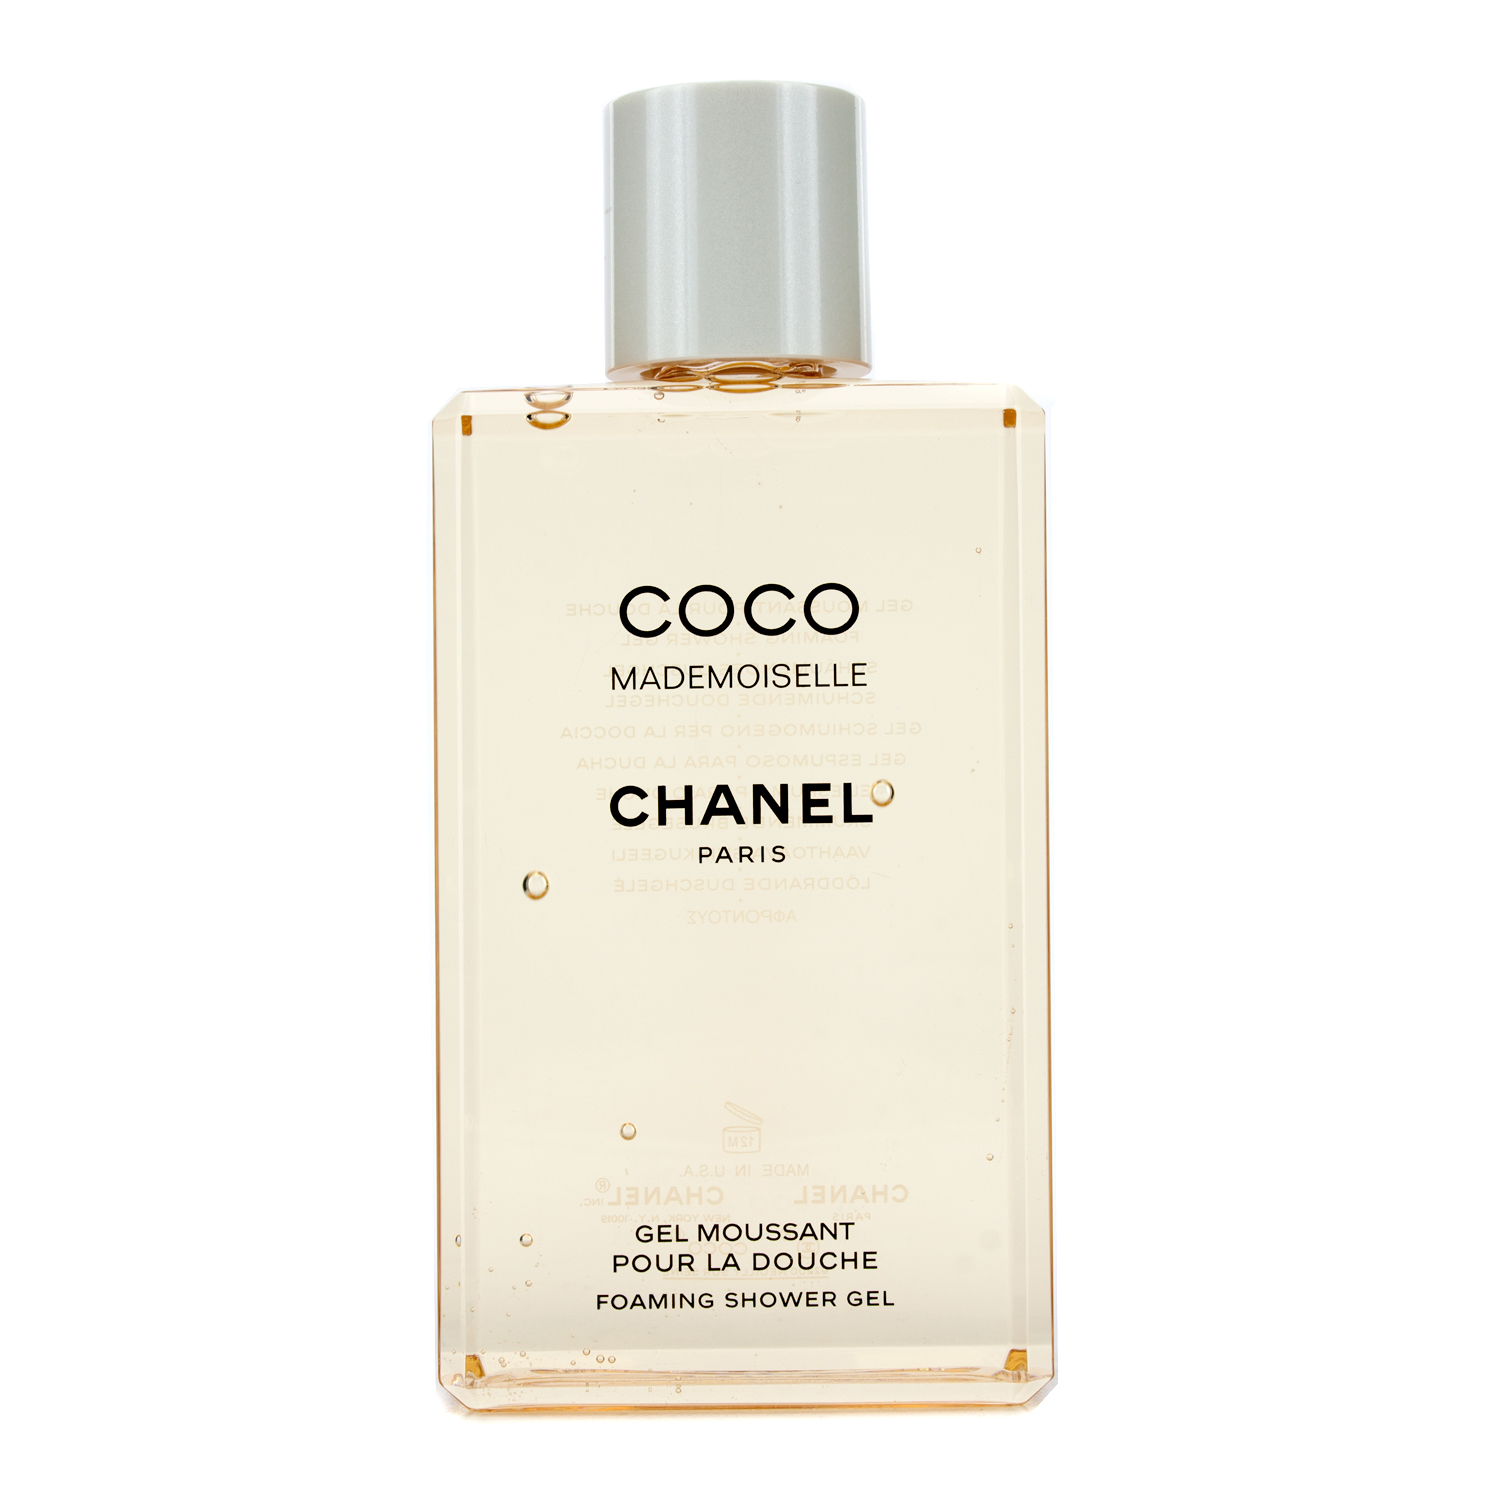 Sữa tắm Nước hoa Chanel Coco Mademoiselle Gel Moussant 400ml  Caos Store